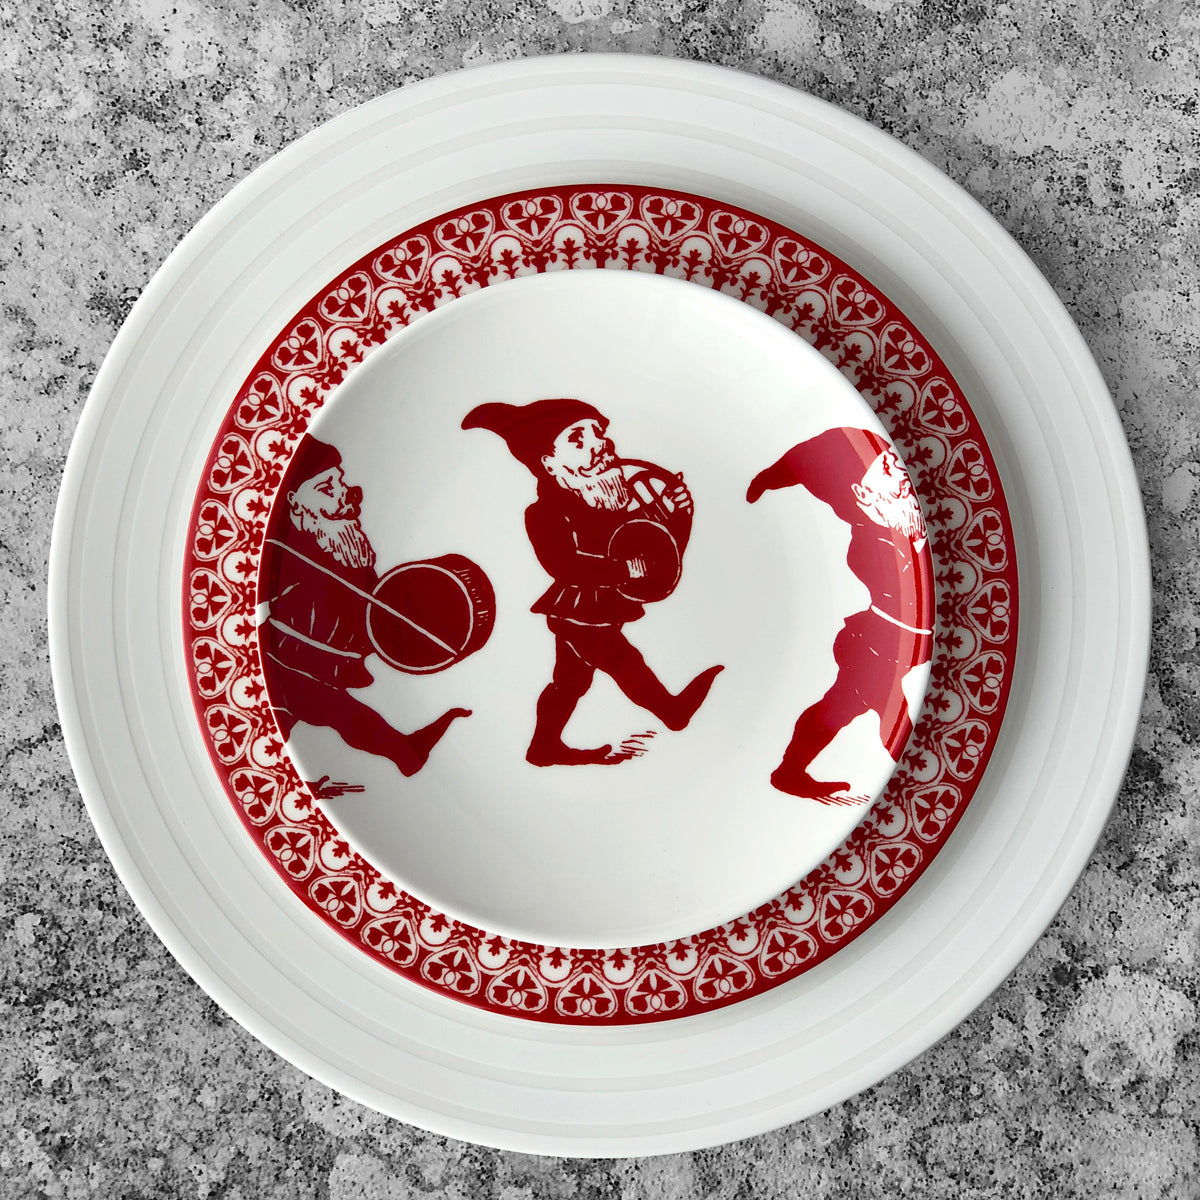 Three playful red elves march across a canapé plate atop a stack of festive dinnerware from Caskata.